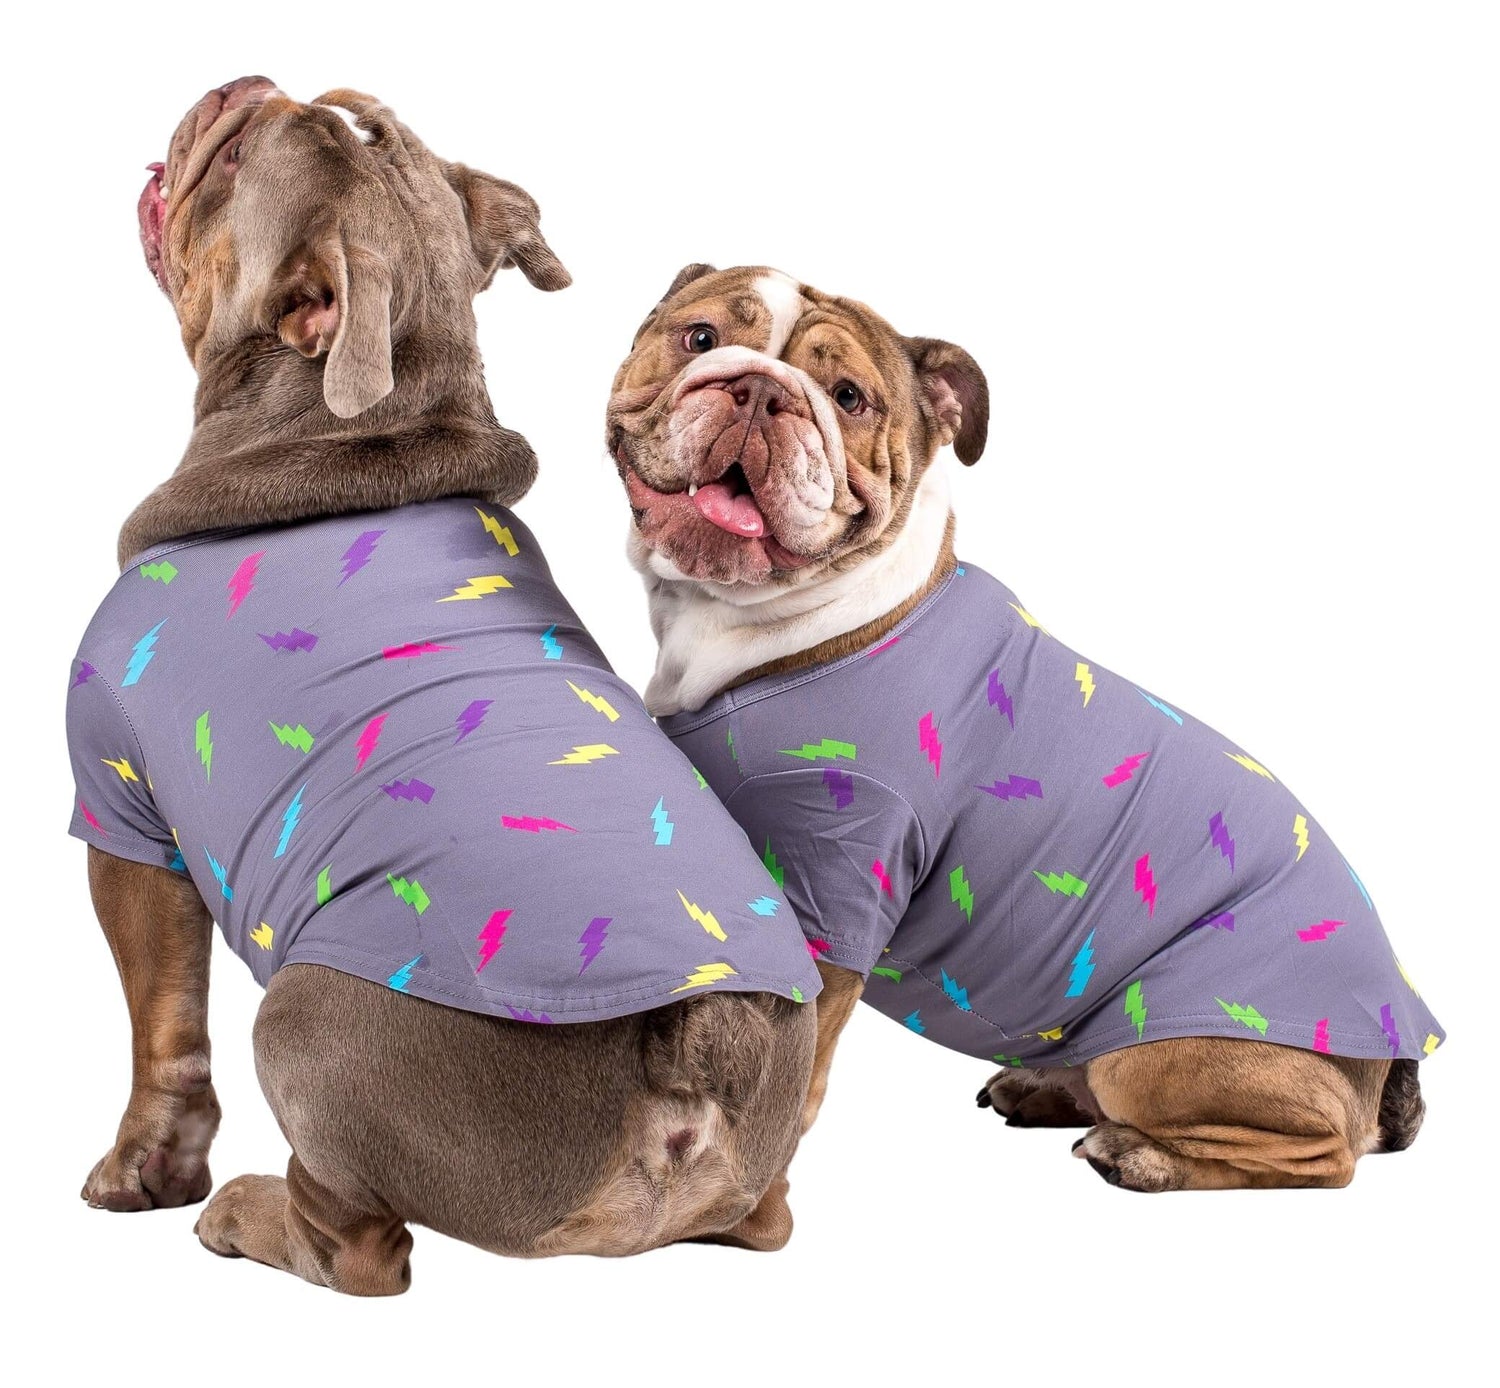 Two english bulldogs facing away from the camera. They are wearing a Electric Energy dog shirt madfe by Vibrant Hound.